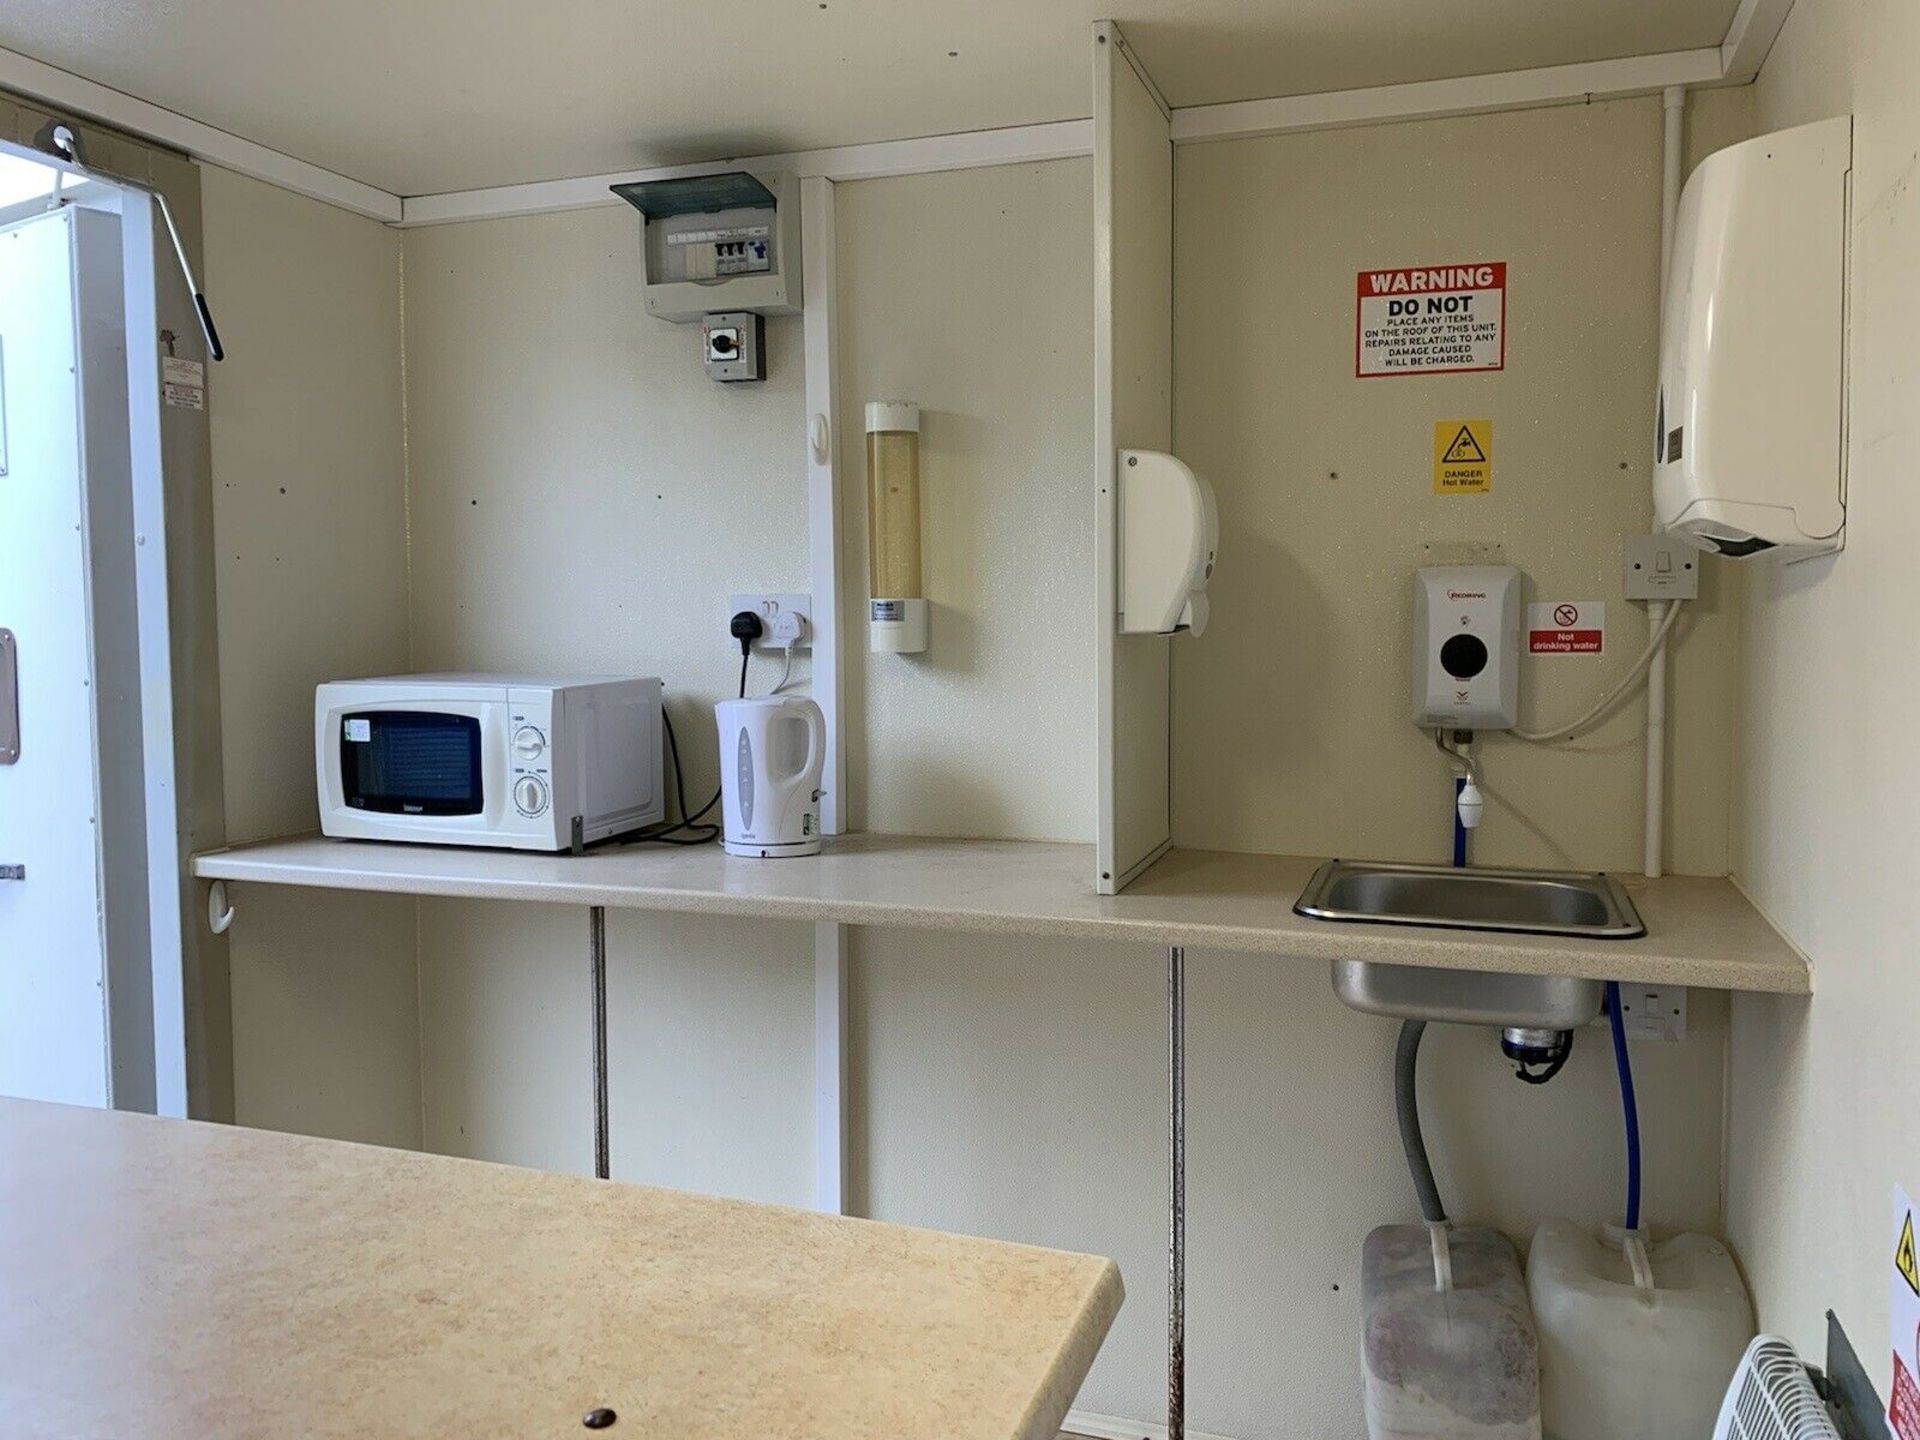 Groundhog Towable Welfare Unit Site Office Canteen Mess Room - Image 7 of 8